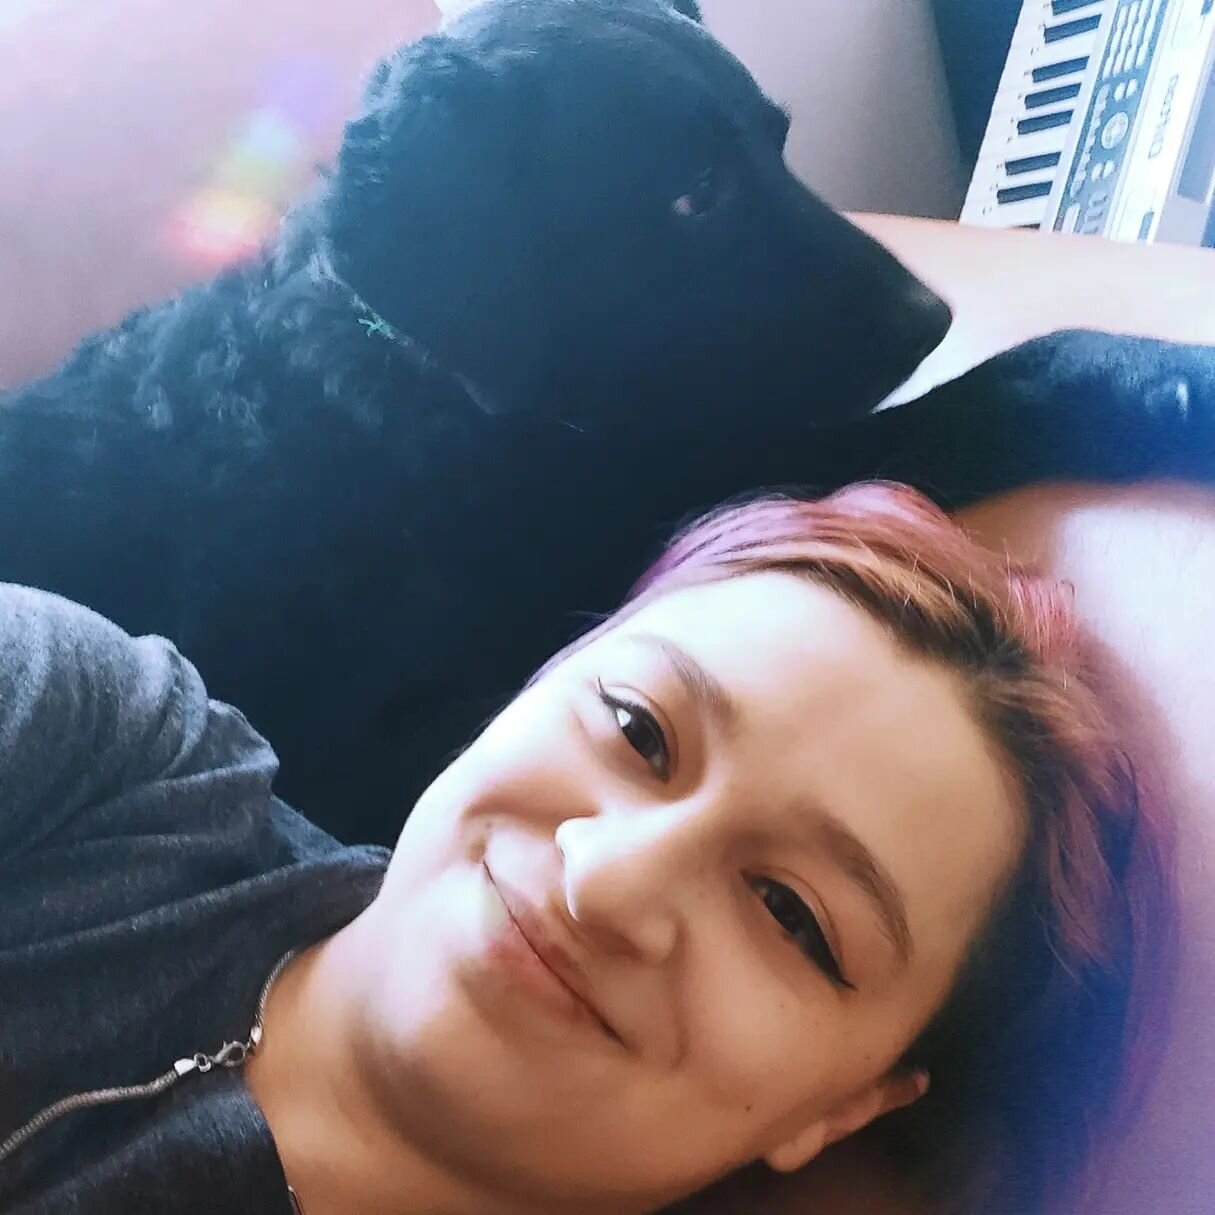 So hard to get a good selfie with a black dog😄 But little Charly and I are defietly enjoying the sunshine today🐶☀️

After my rehearsal with my punk rock band @bloodandchampagneband for our concert this Thursday 🎶🎤 I think we're gonna take a long 